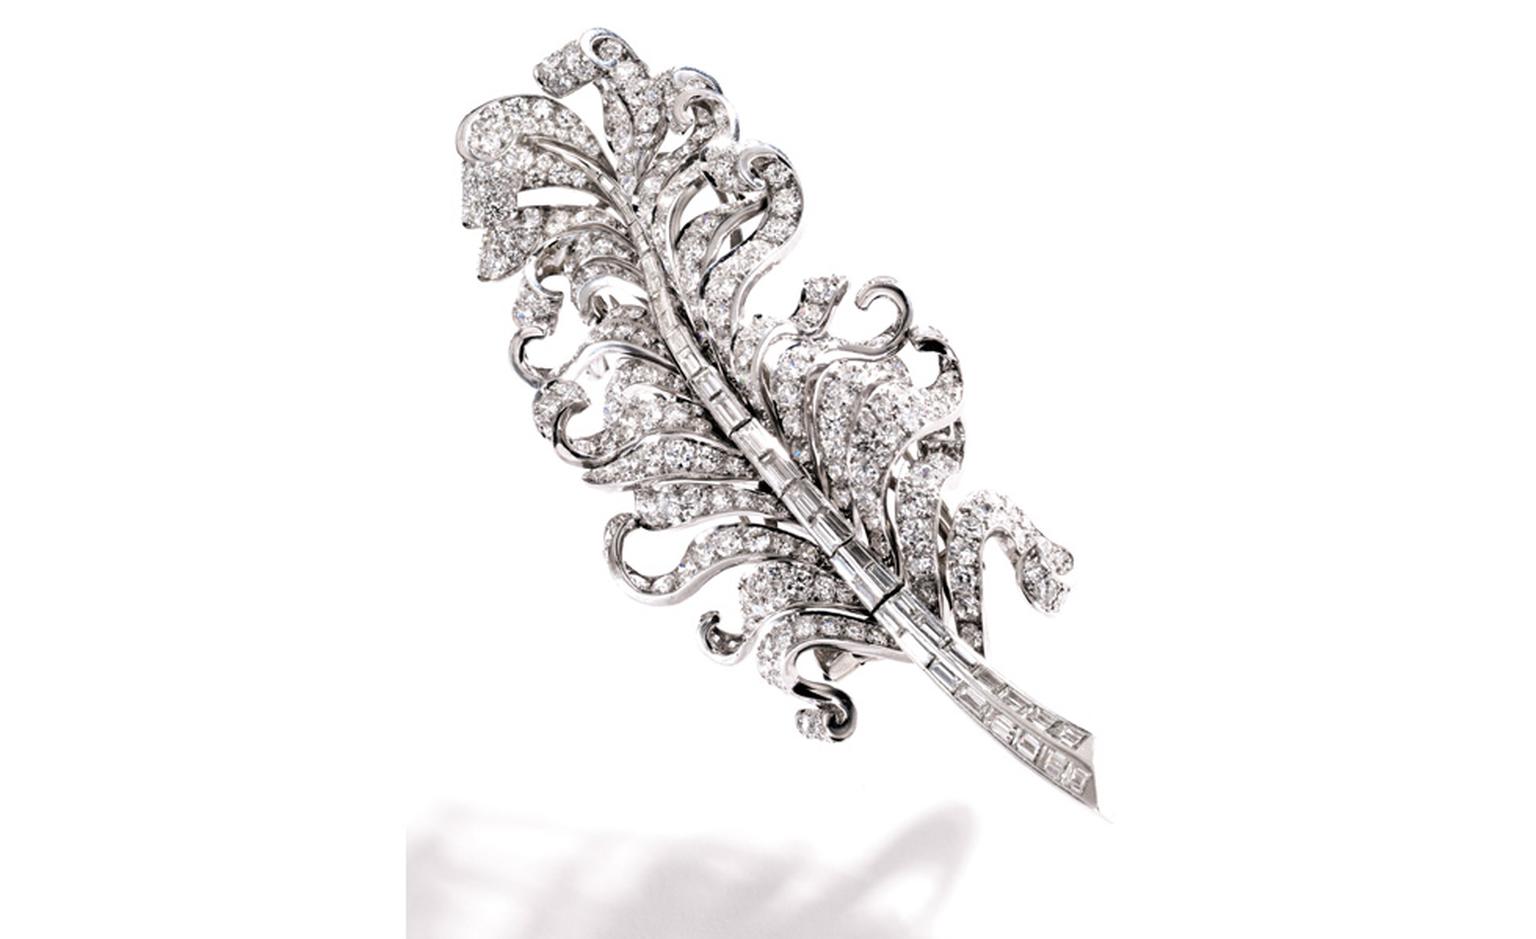 Lot 330 Platinum and Diamond Feather Brooch, Circa 1940, possibly designed by Verdura for Flato Est. $30/50,000. SOLD FOR $374,500